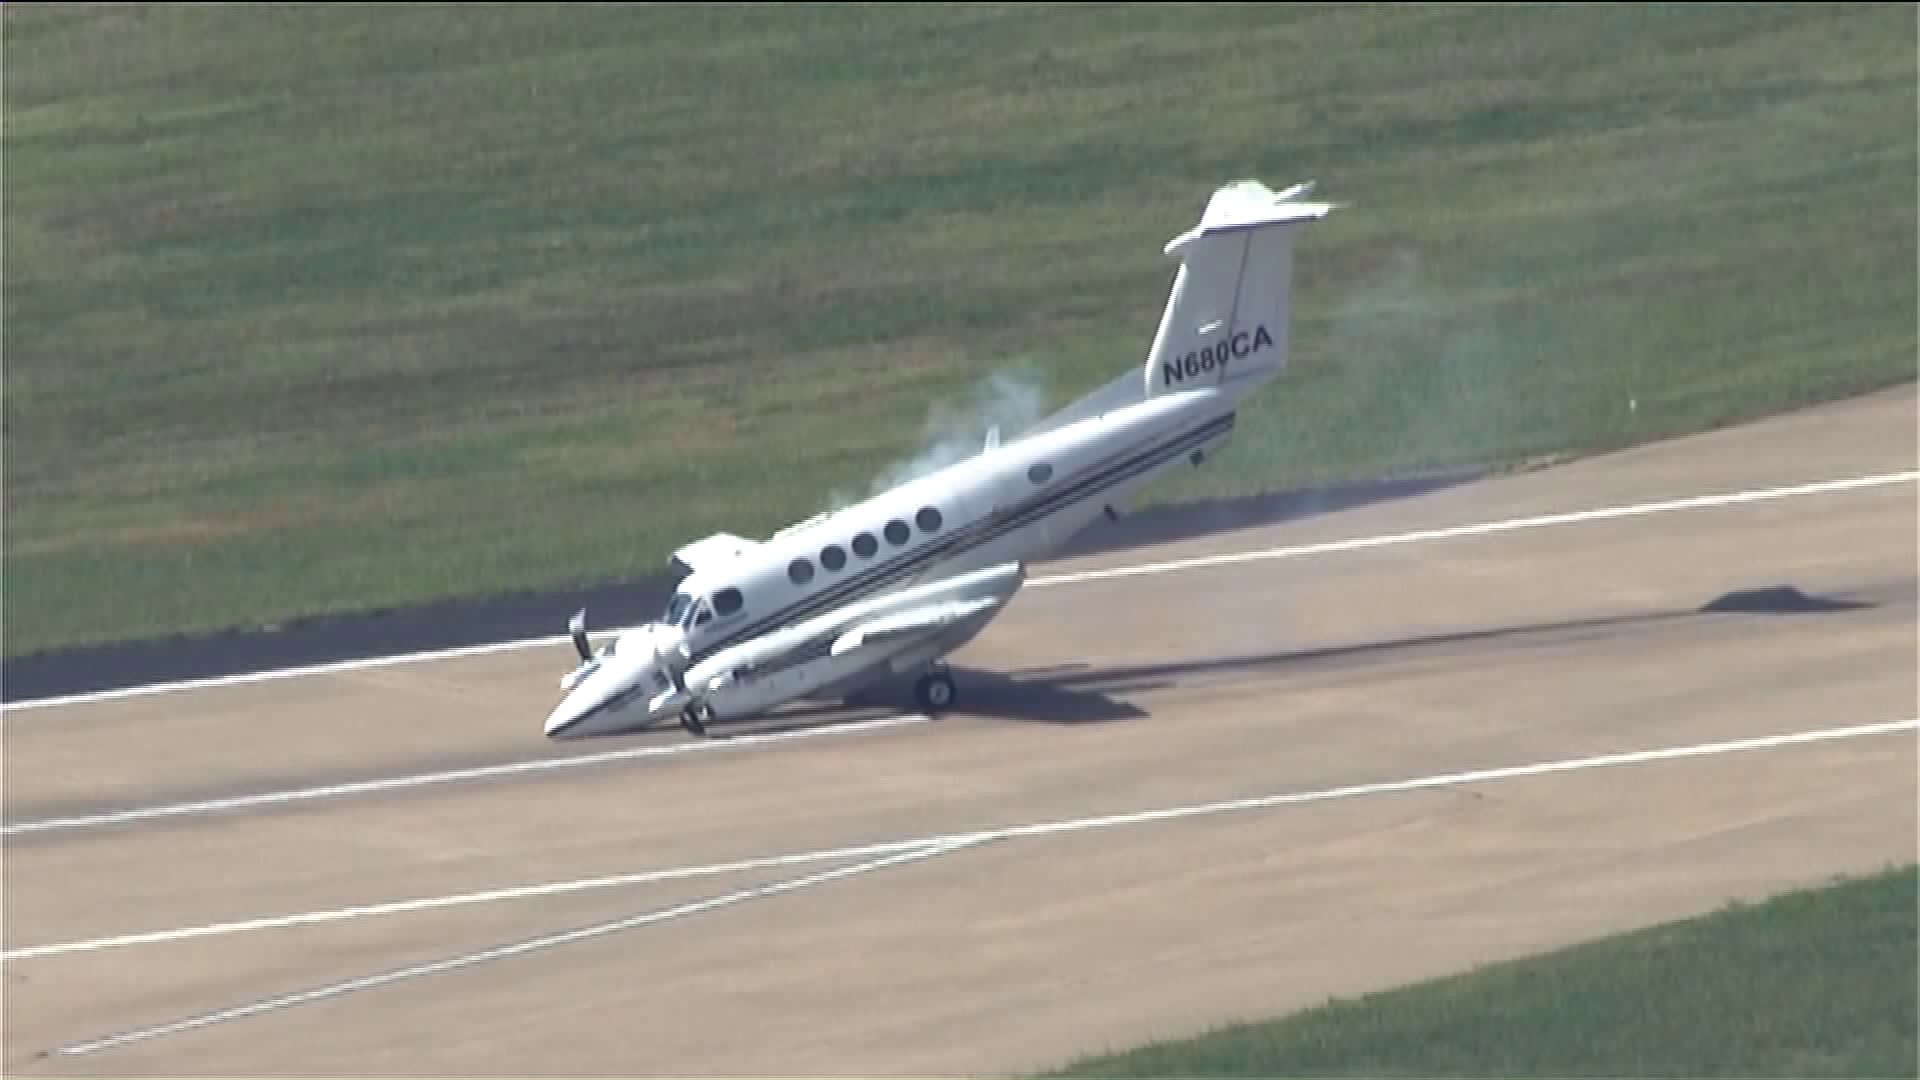 Video shows plane landing at Oklahoma airport after nose gear fails ...